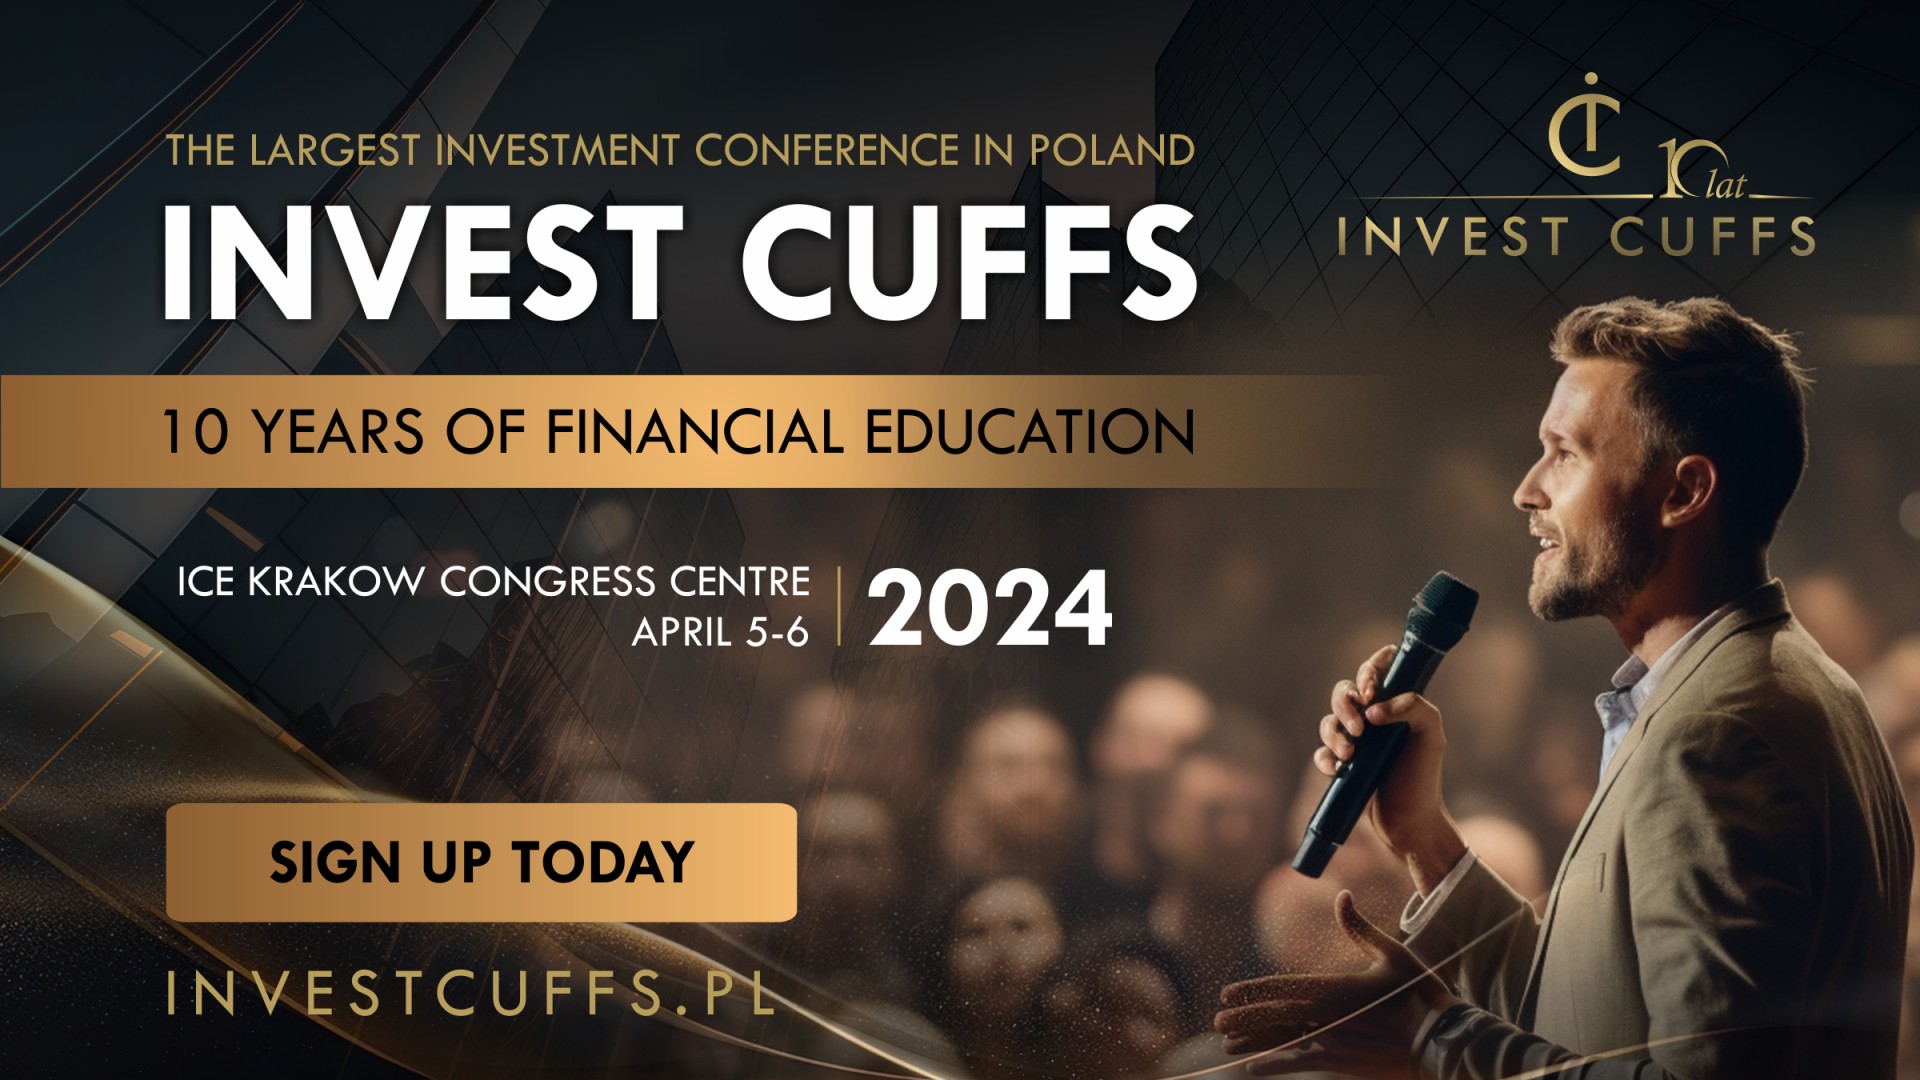 Find out how the best are investing! Invest Cuffs 2024 conference on April 5-6 - Corporate Press Release - News